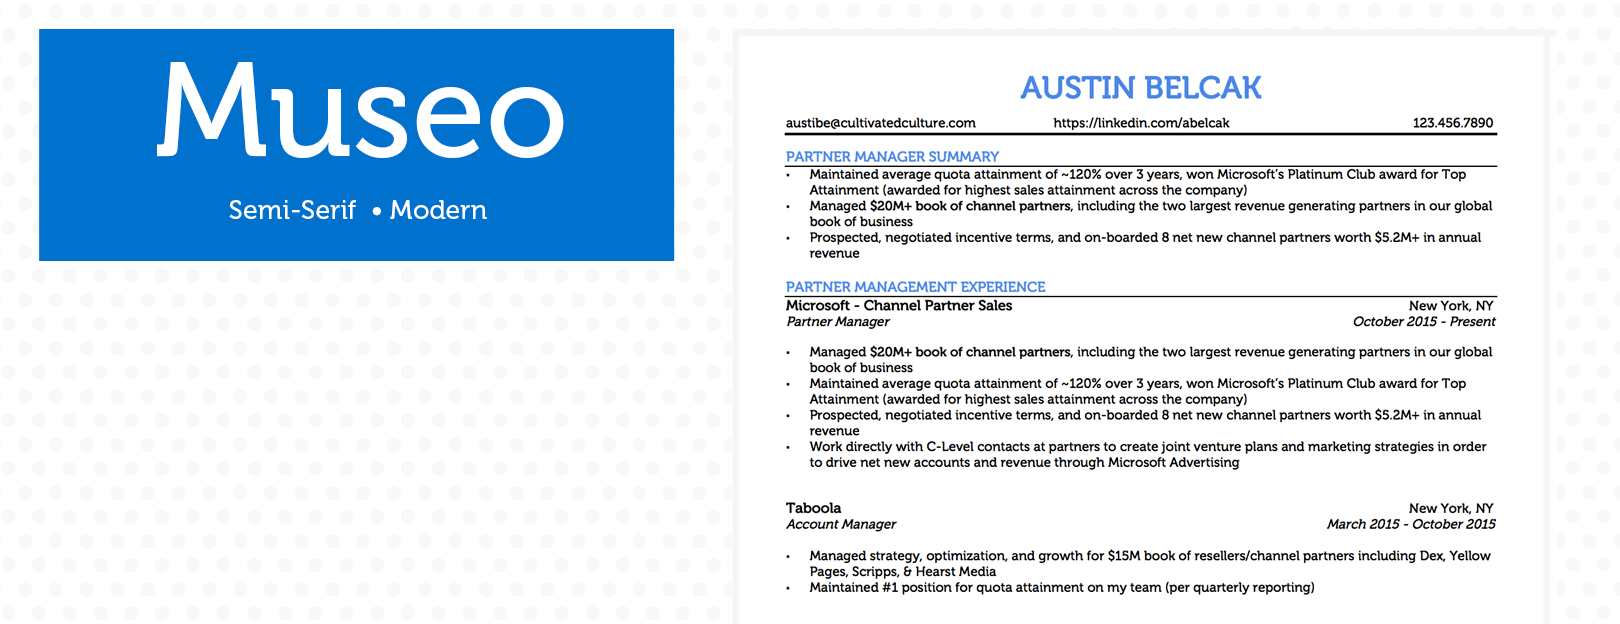 Example of Museo Font For Resume